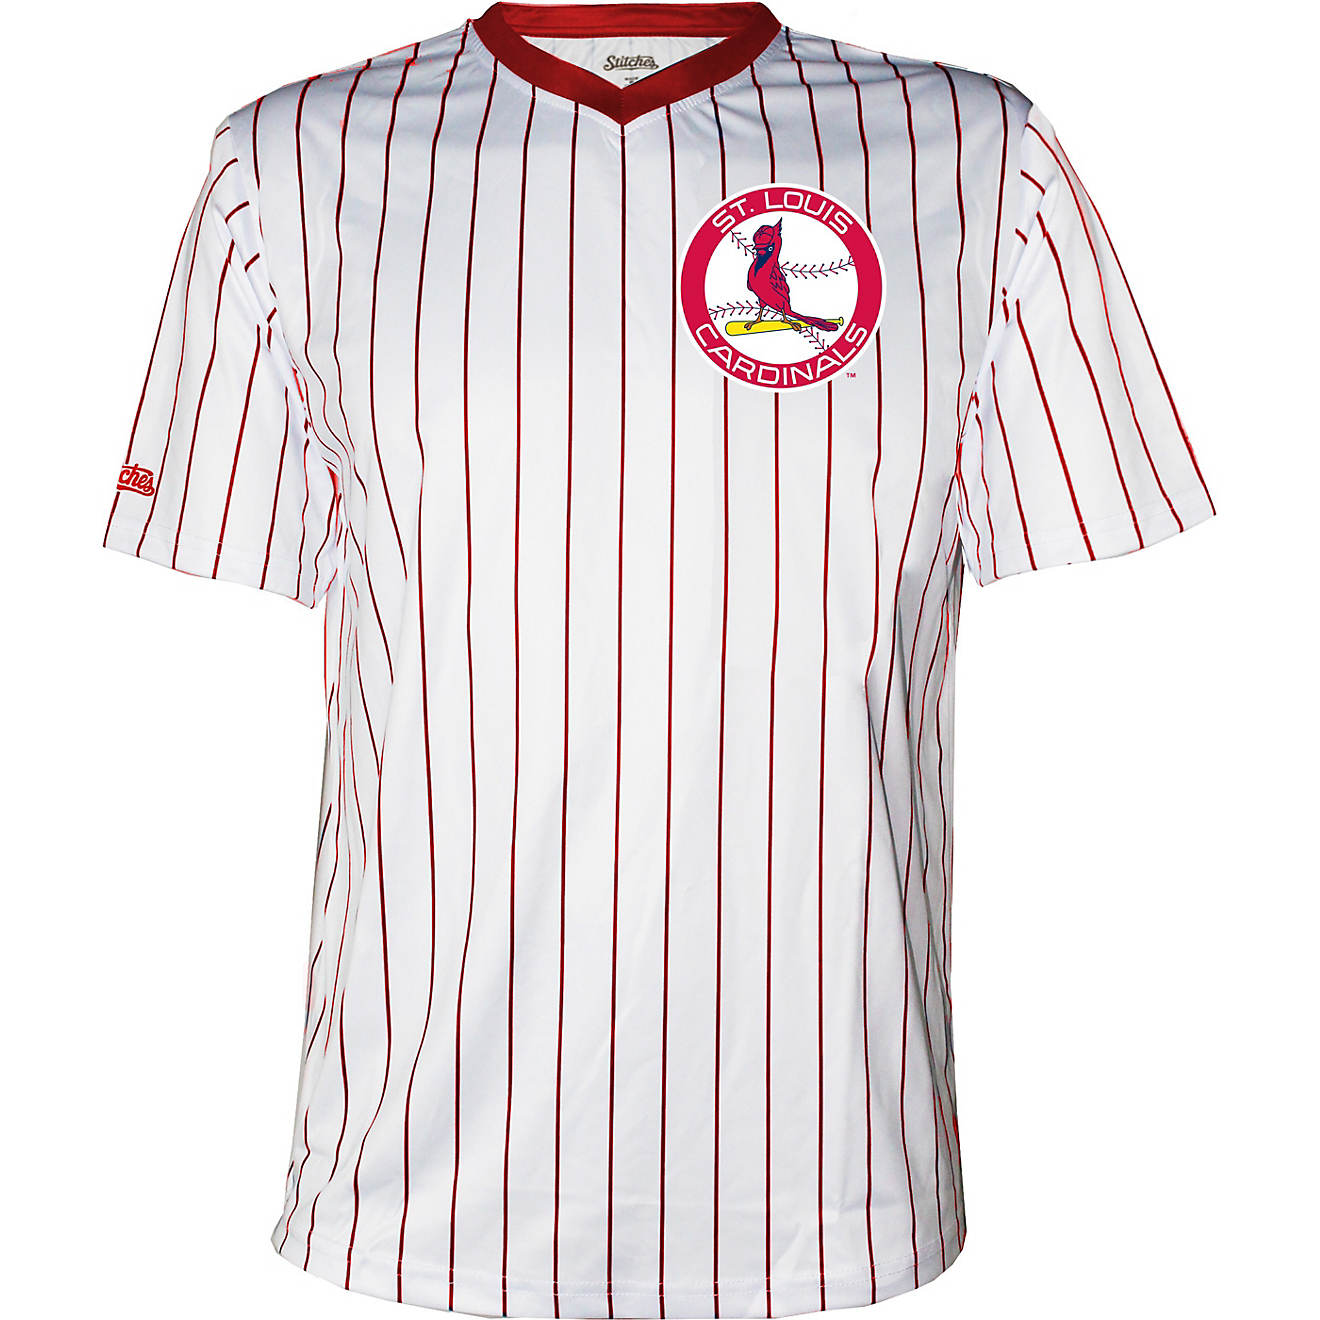 Stitches Boys' St. Louis Cardinals Pinstripe Sublimated Jersey | Academy